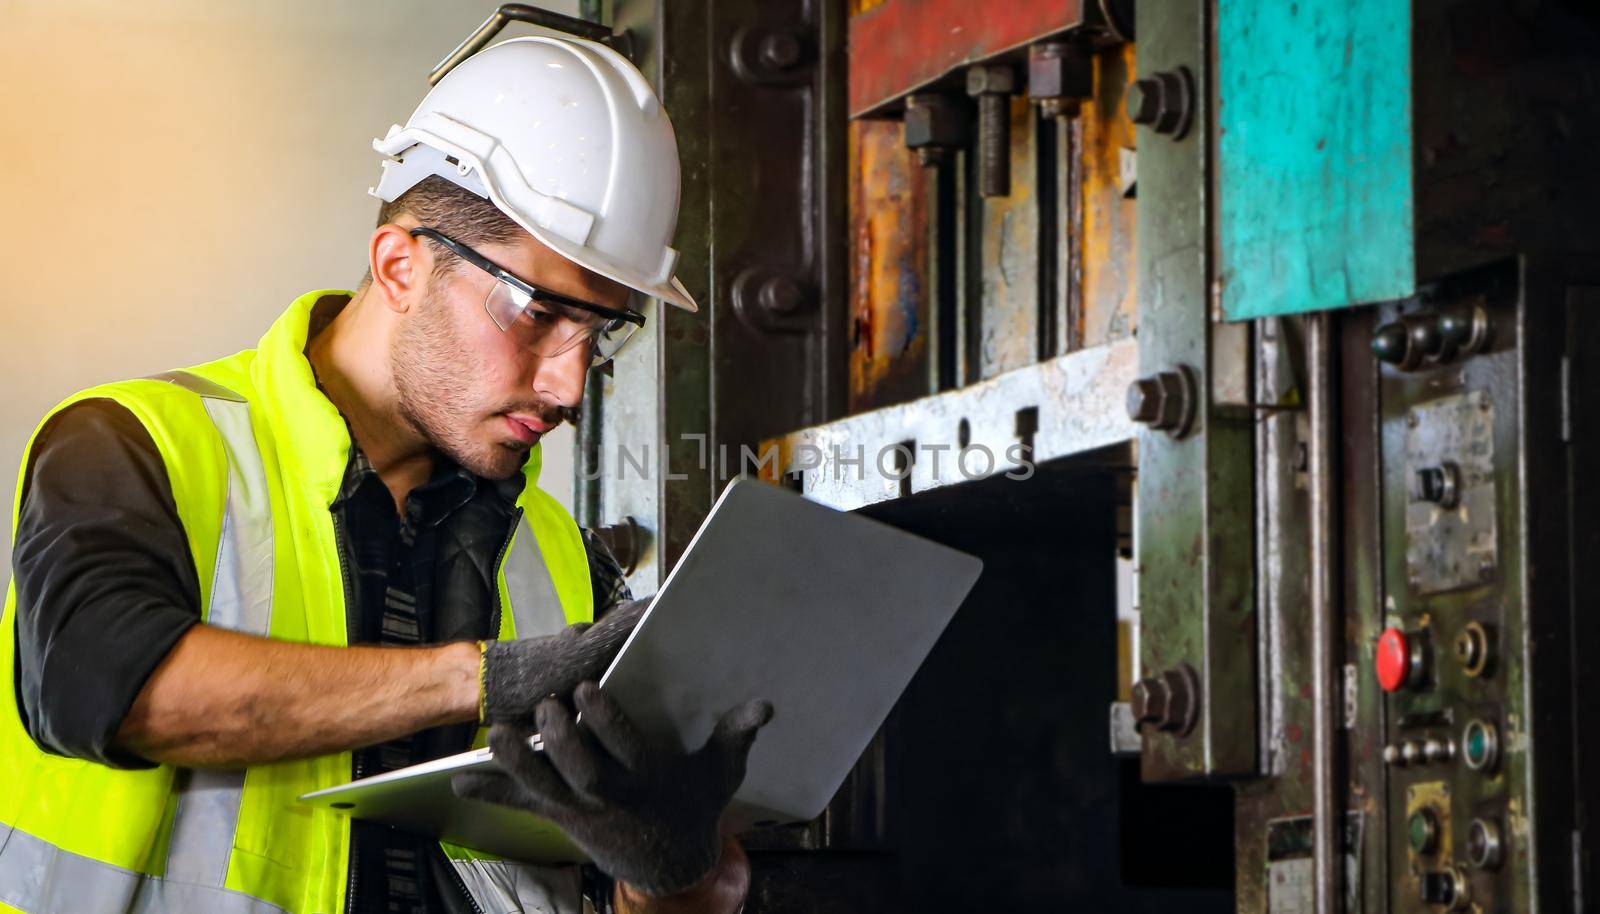 A professional male engineer wearing a uniform and glasses uses a laptop to find maintenance information. And installation of machines in industrial plants With confidence Concept of engineering